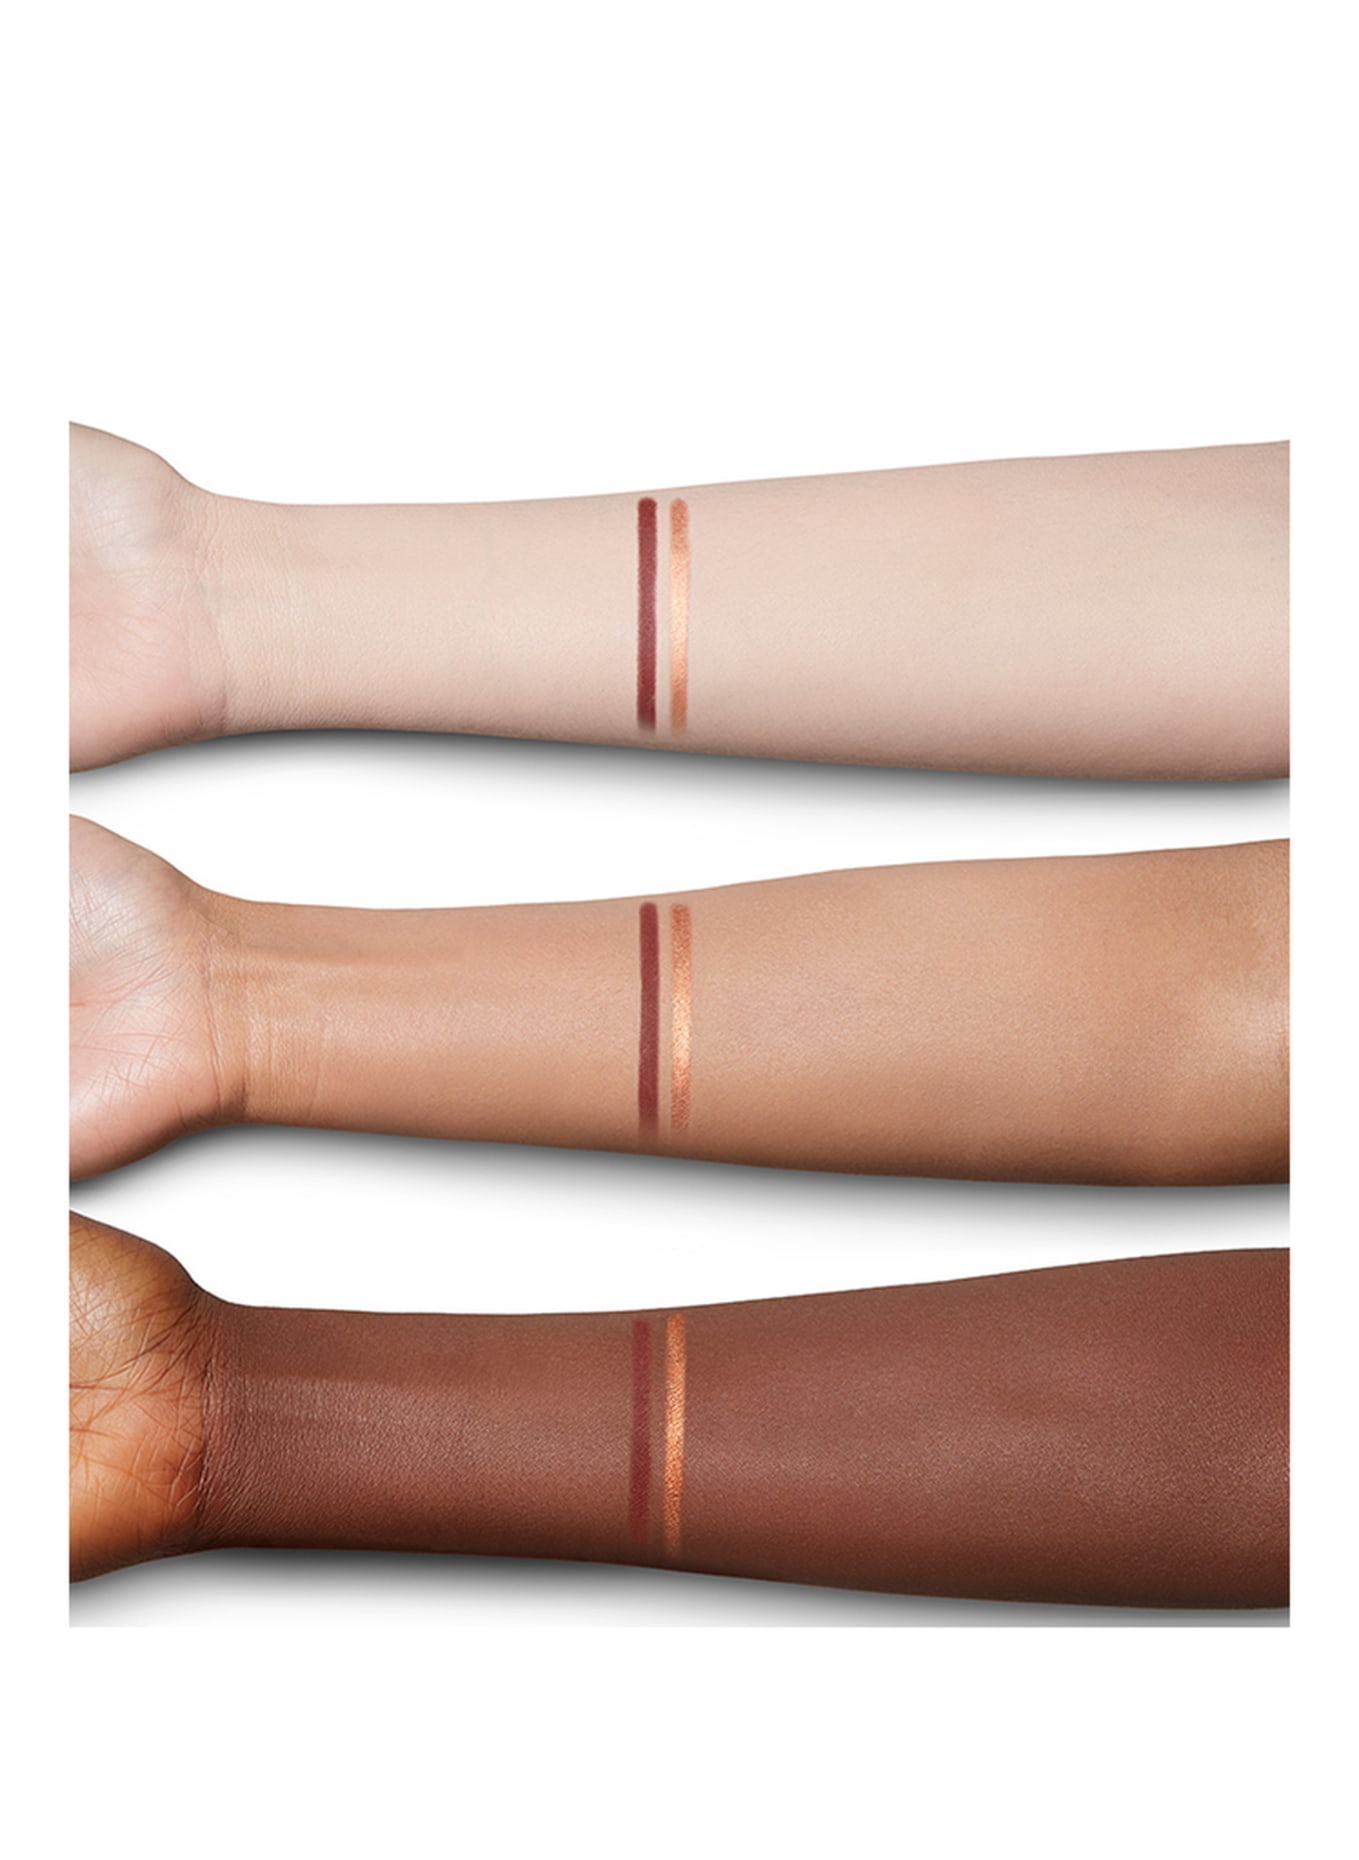 Charlotte Tilbury DOUBLE ENDED LINER – COPPER CHARGE, Farbe: COPPER CHARGE (Bild 5)